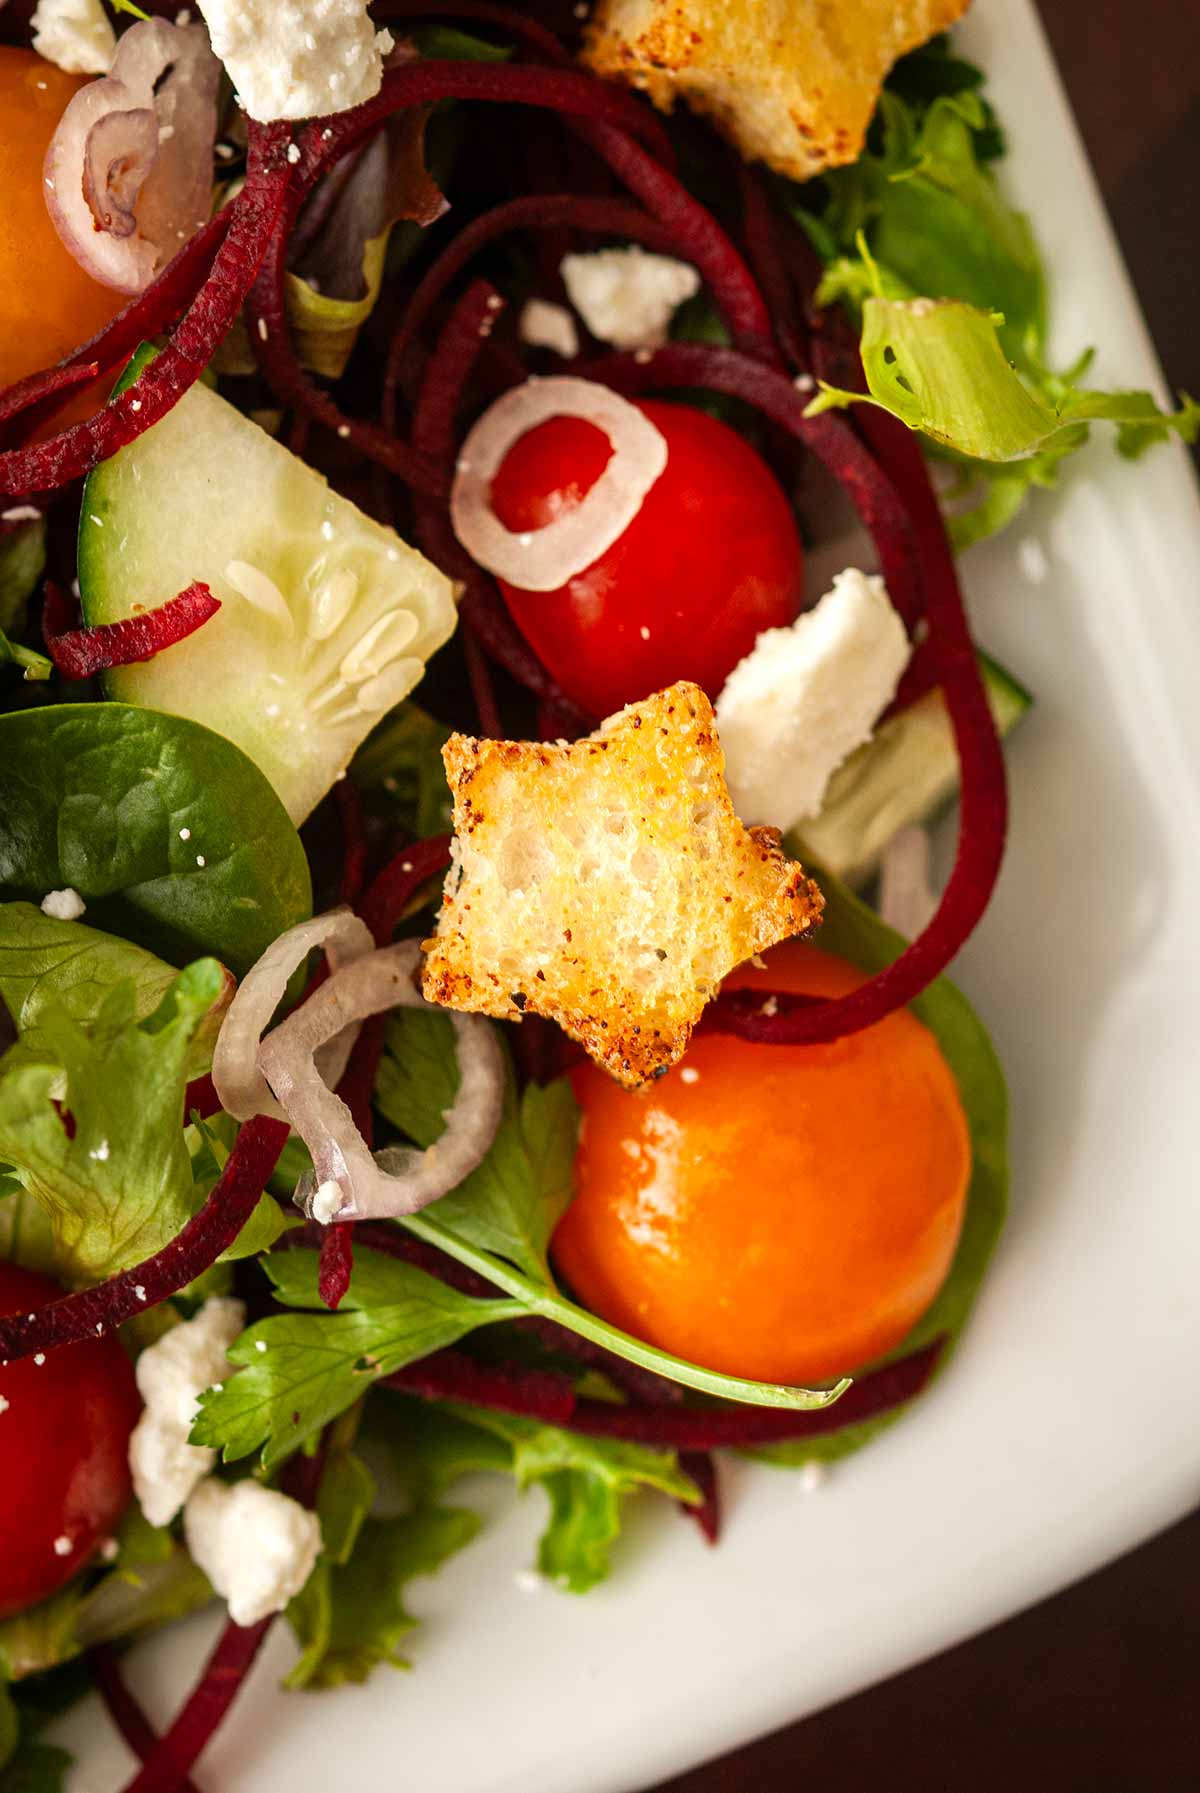 A star crouton in the corner of a salad.